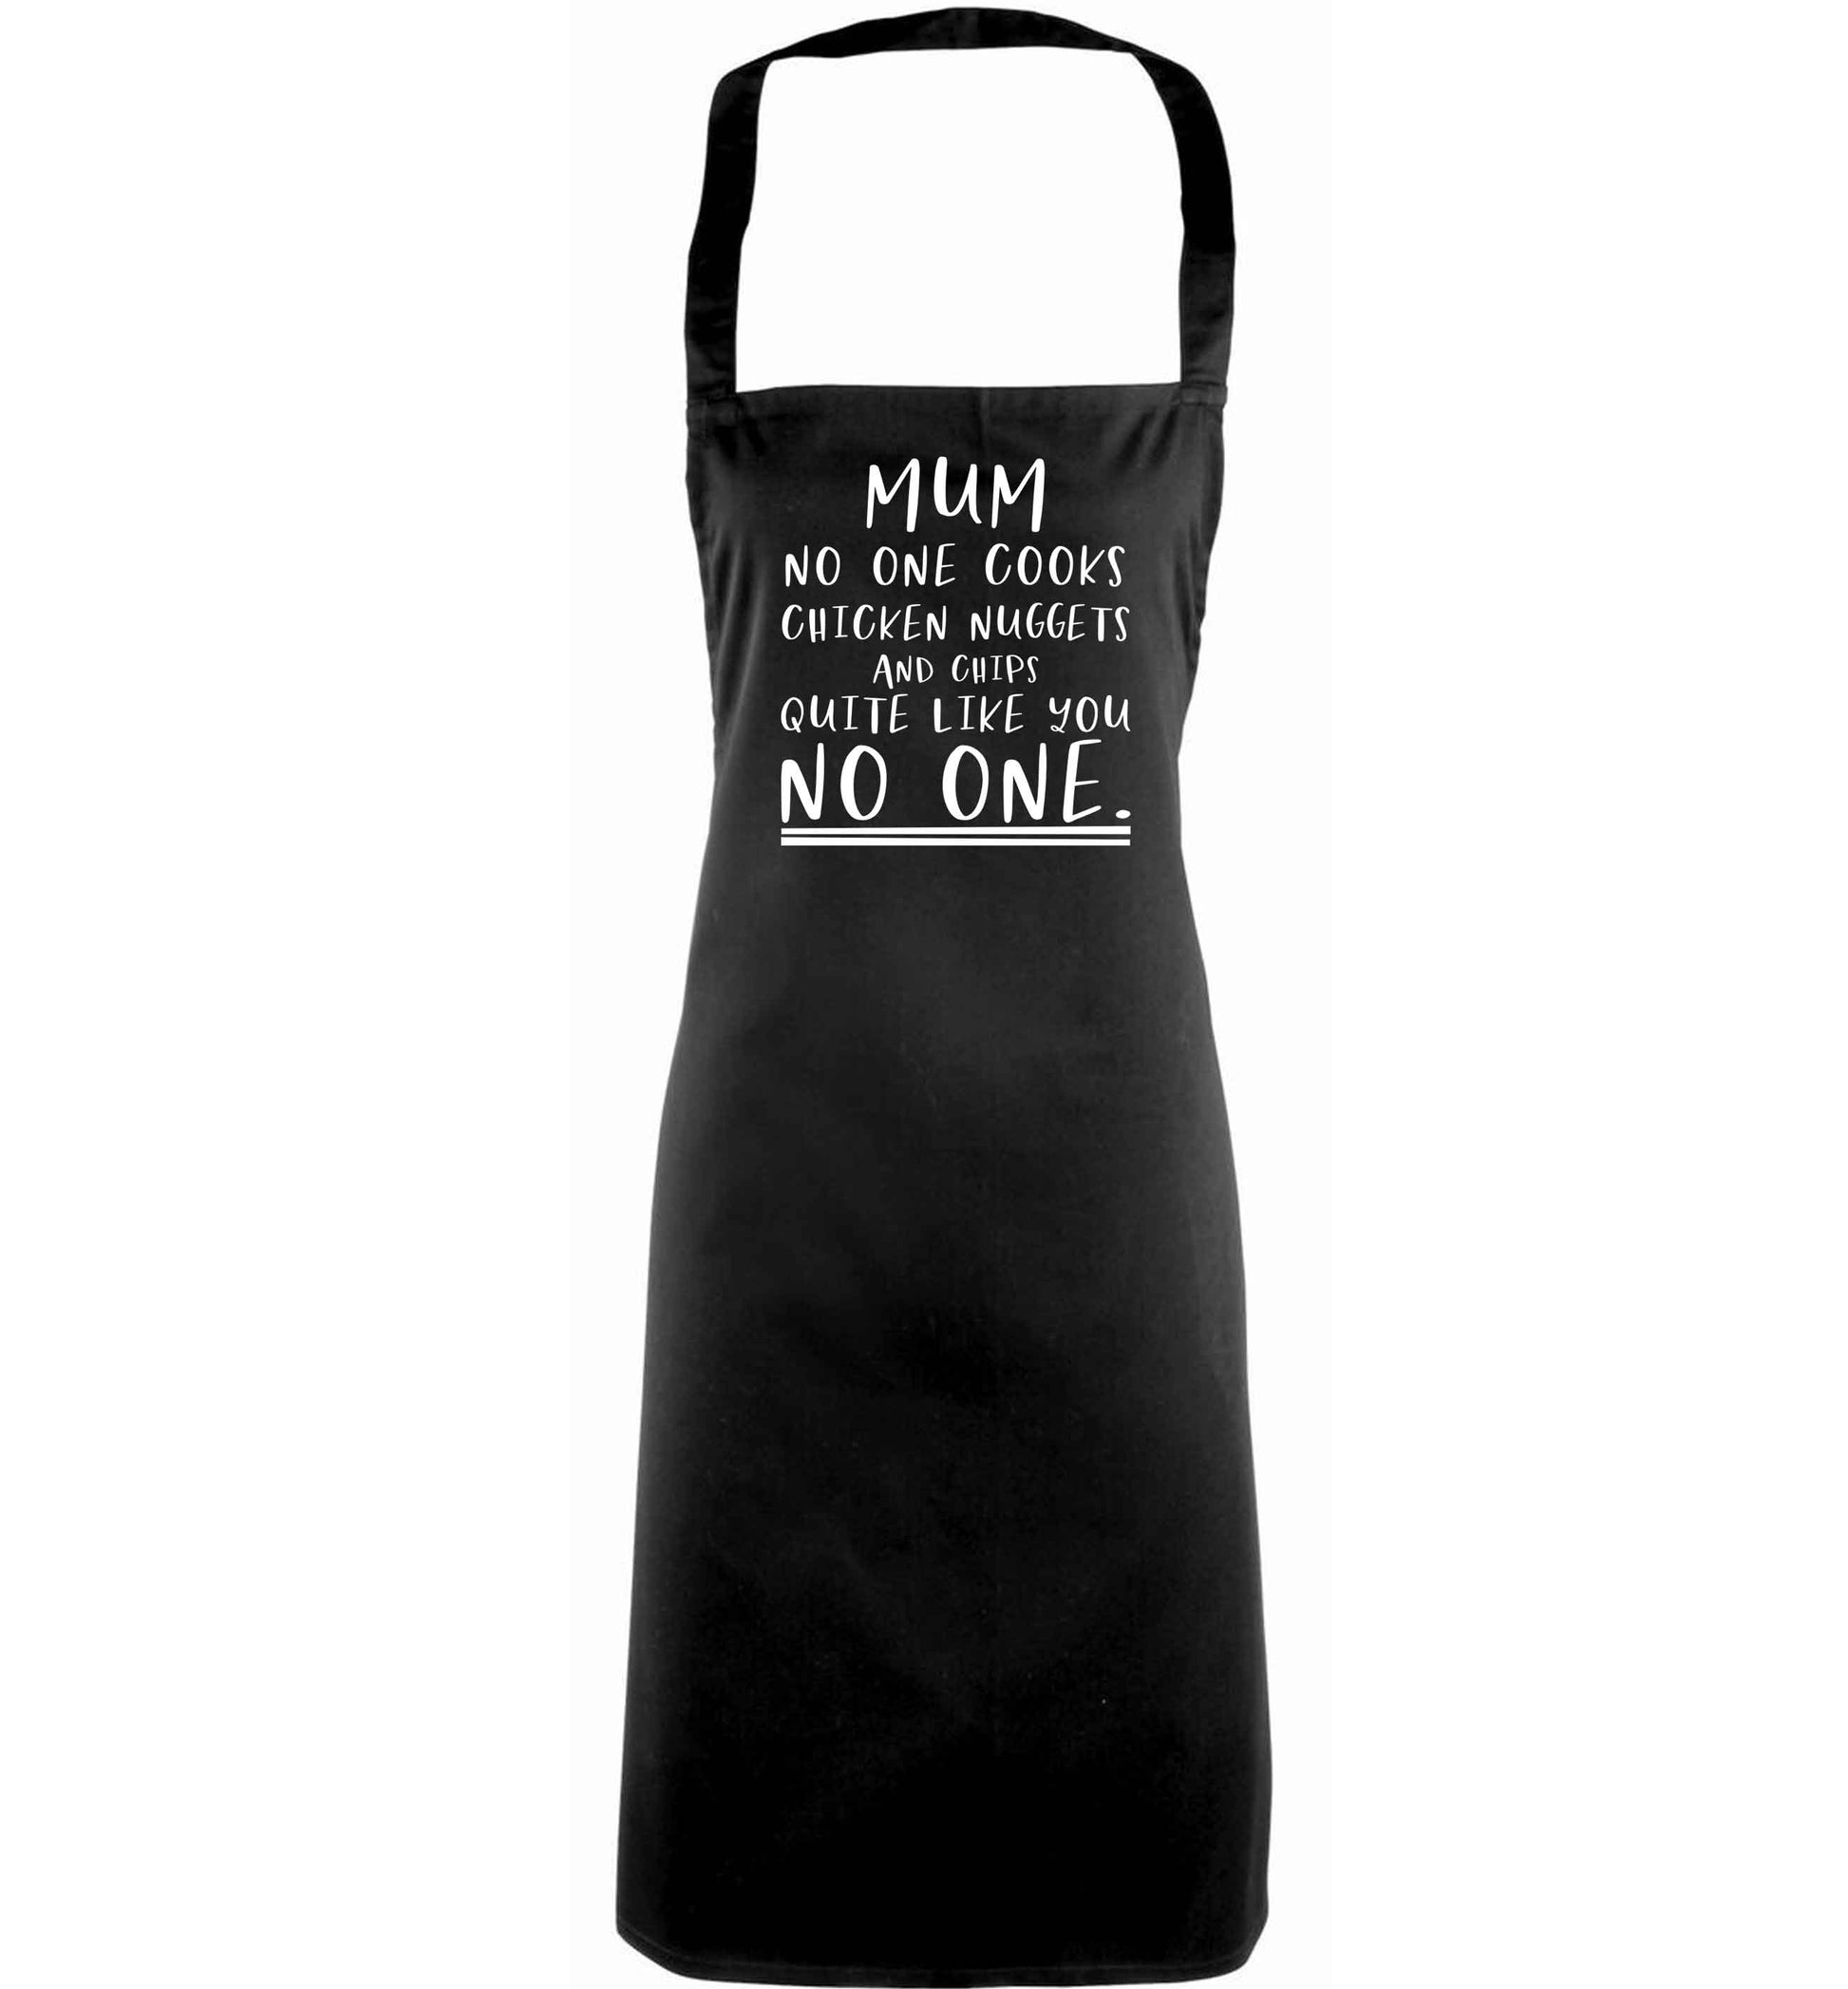 Super funny sassy gift for mother's day or birthday!  Mum no one cooks chicken nuggets and chips like you no one adults black apron